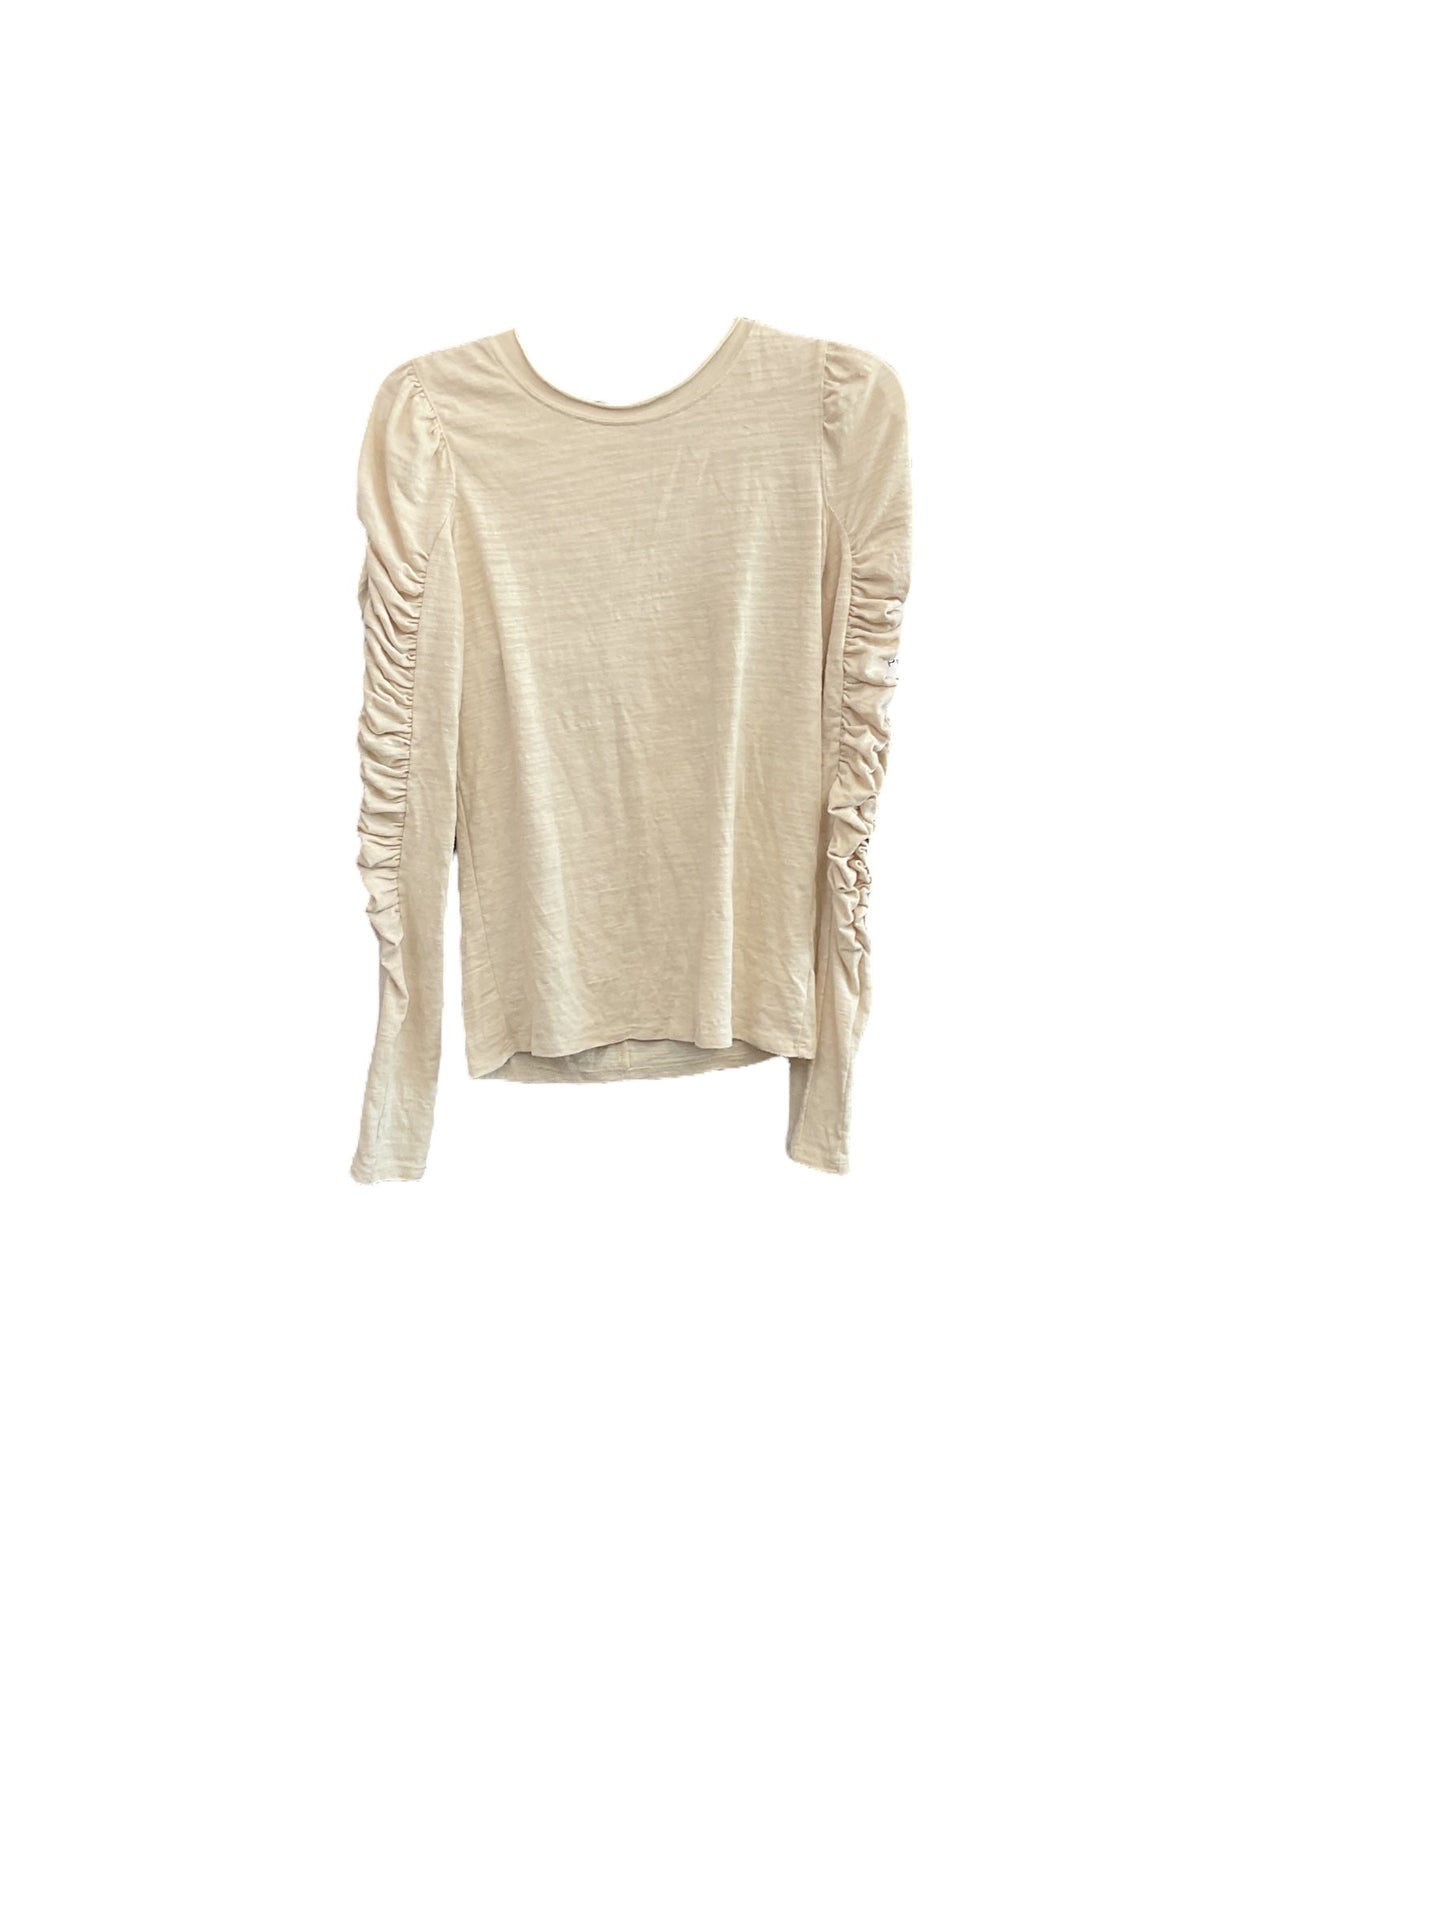 Cream Top Long Sleeve We The Free, Size Xs